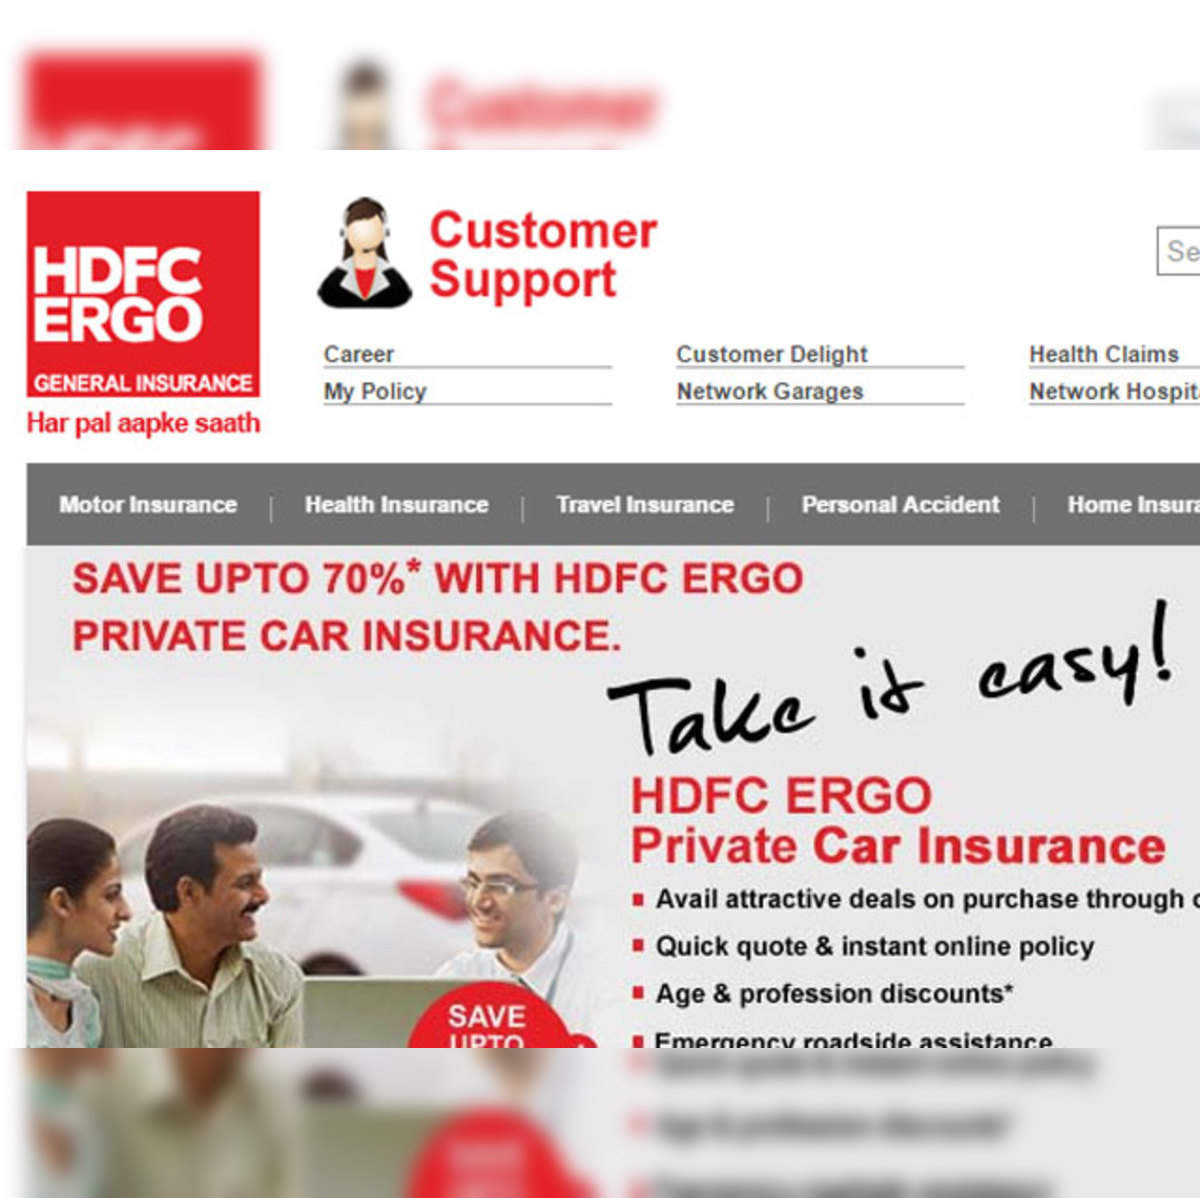 Health Medisure Super Top Up Insurance Policy in India | HDFC ERGO